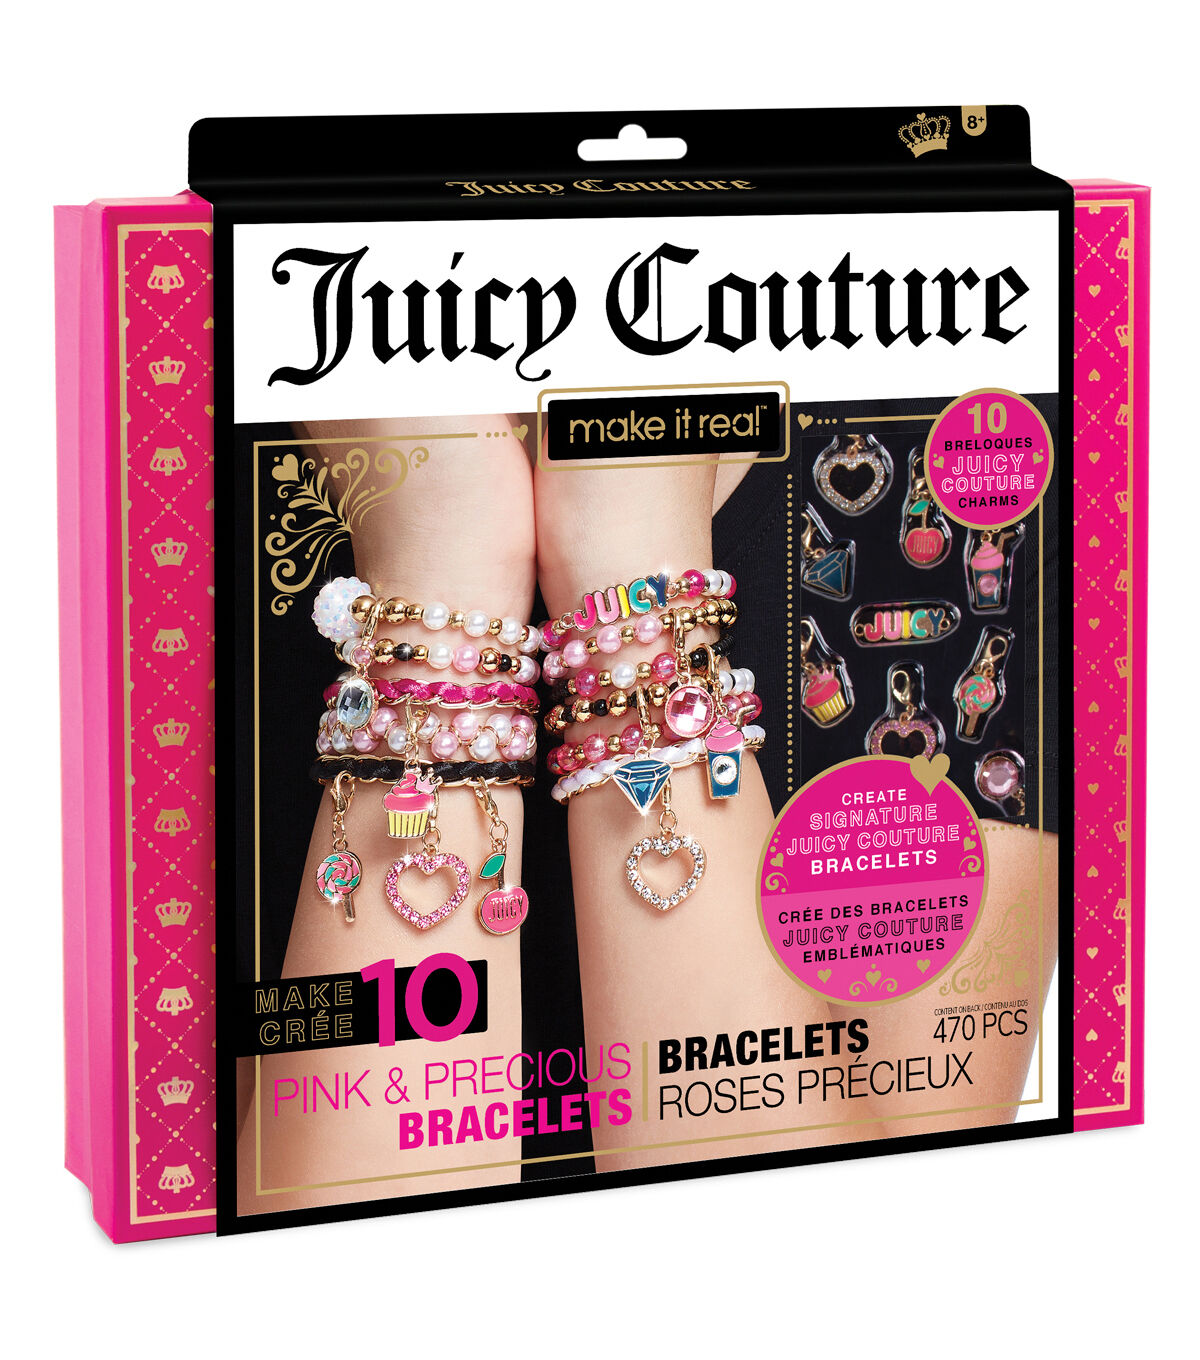 Make It Real - Juicy Couture Pink and Precious India | Ubuy